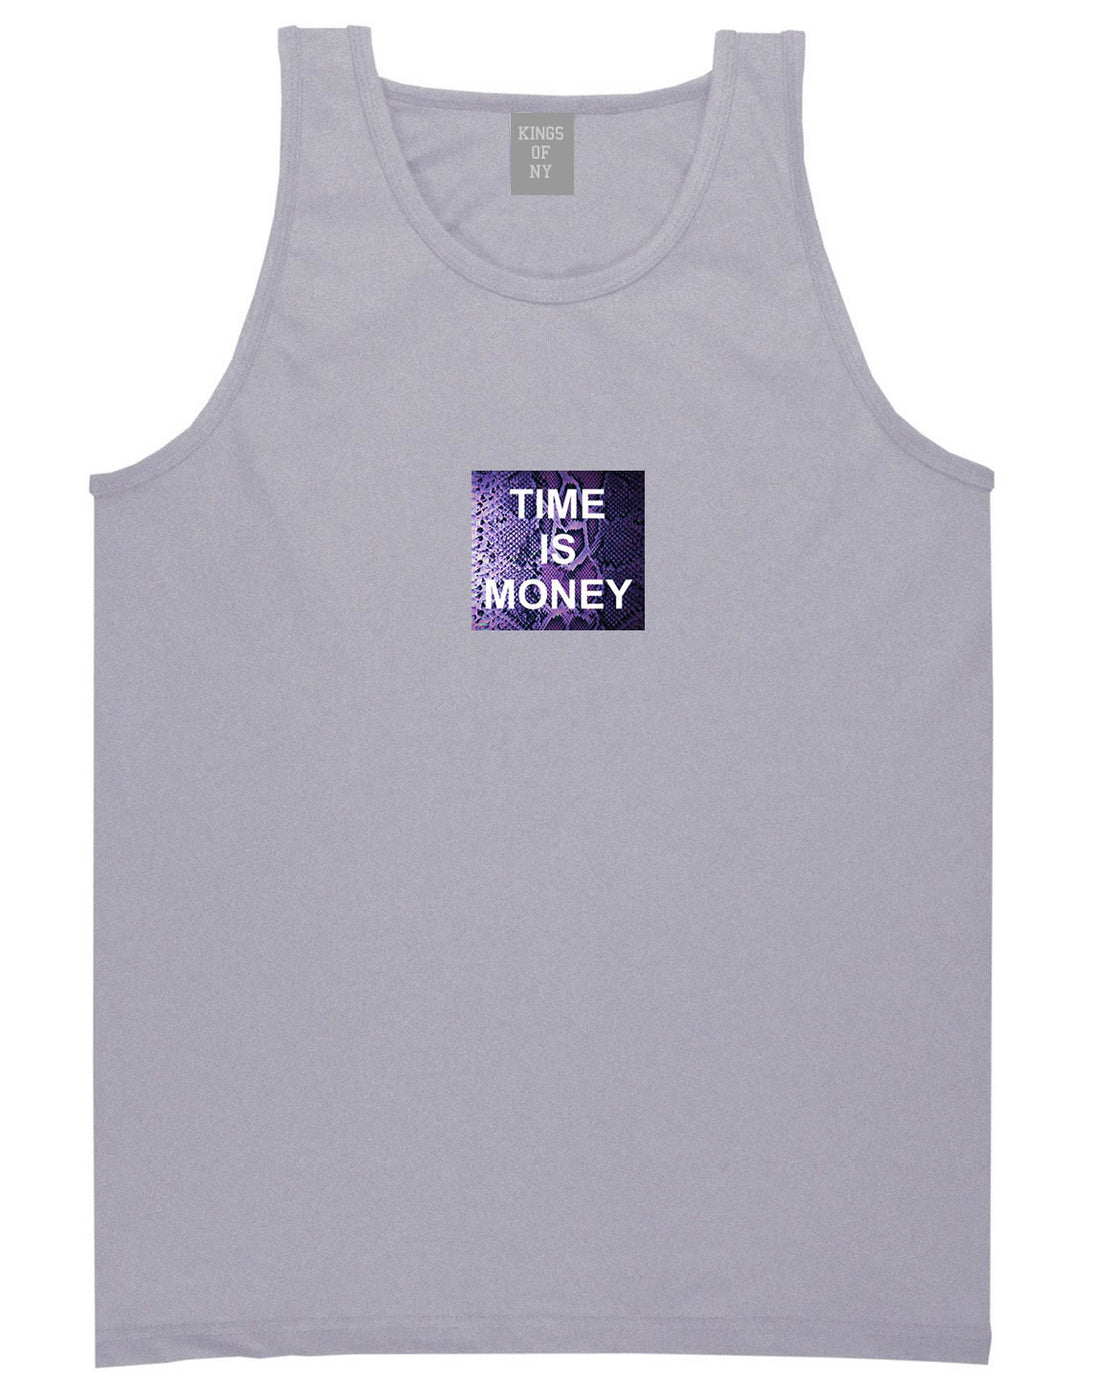 Time Is Money Snakesin Print Tank Top in Grey By Kings Of NY